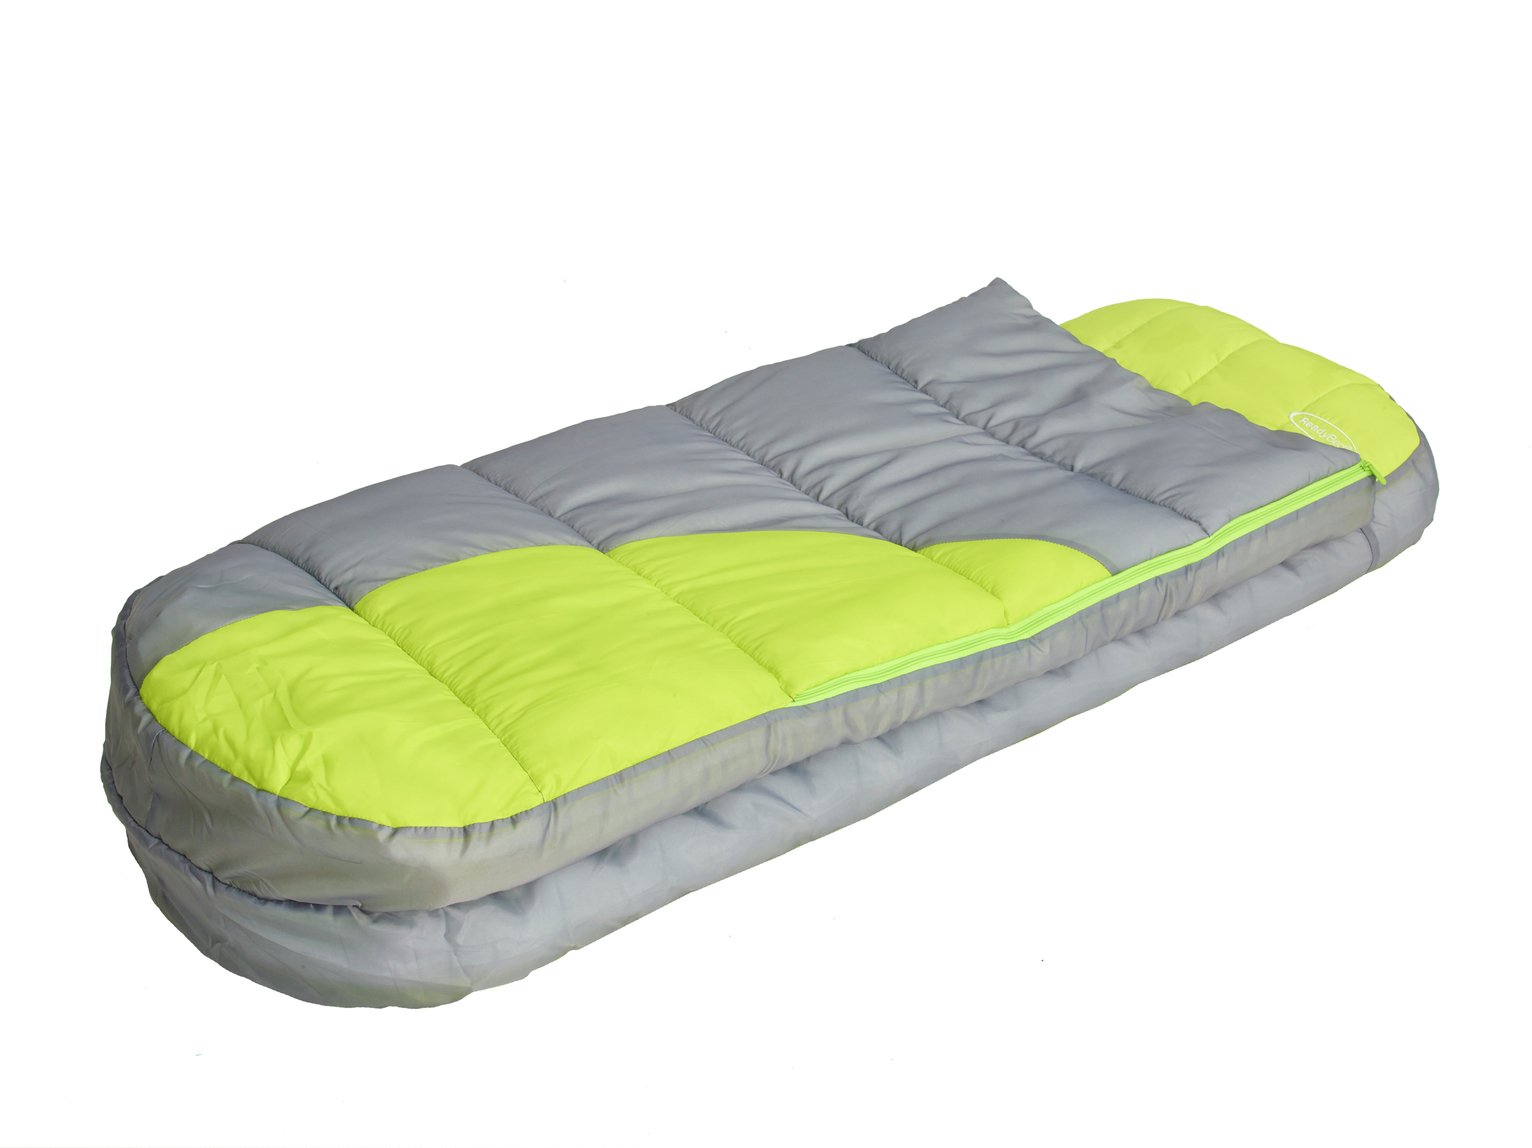 ReadyBed Junior Inflatable Camping Air Bed and Sleeping Bag